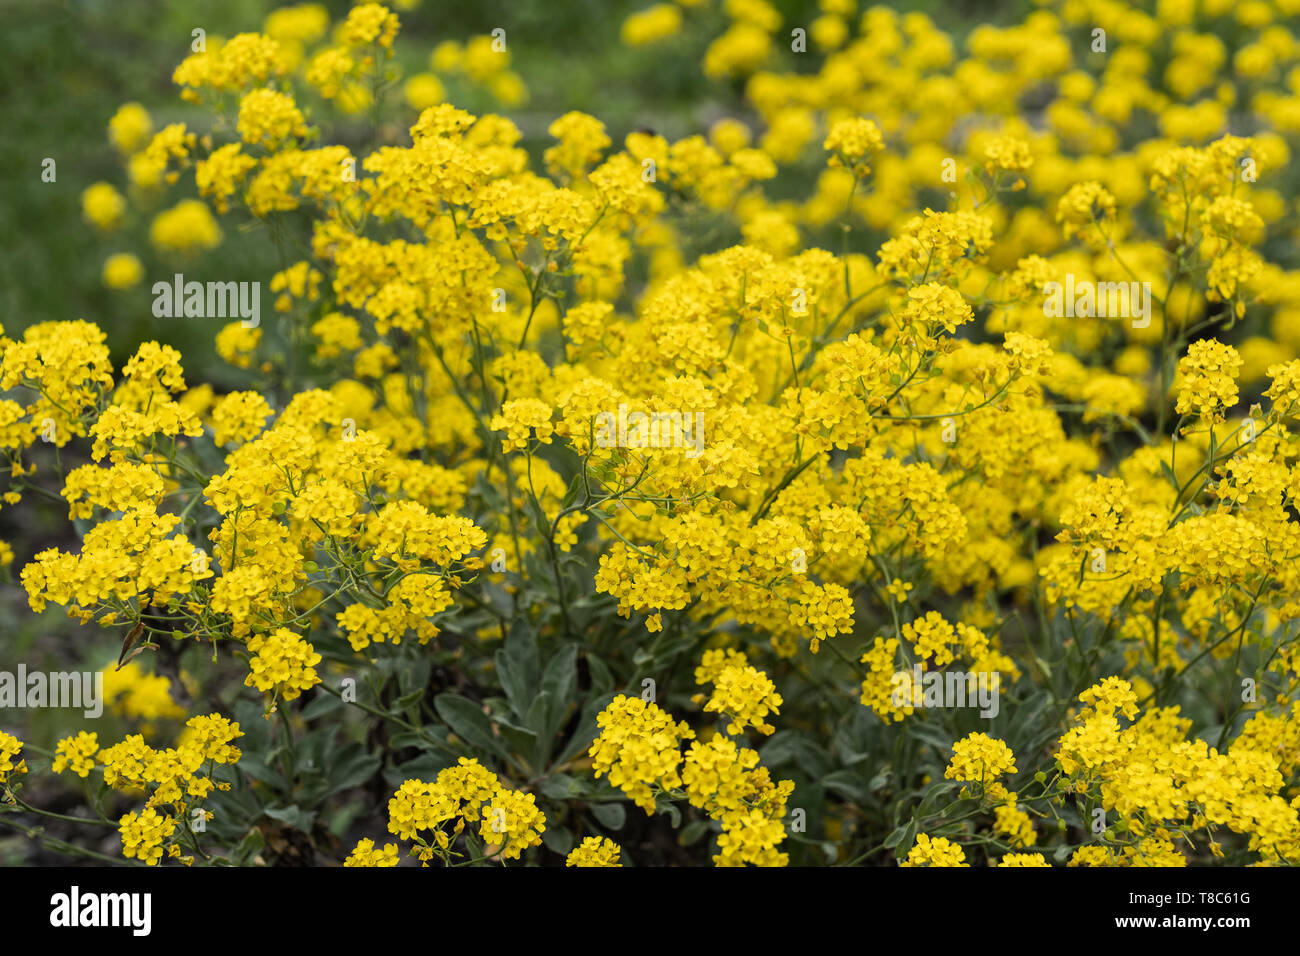 Aurinia saxatilis - Basket of Gold or Golden Alyssum yellow blooming flowers, evergreen parennial plant native to Asia and Europe. Stock Photo